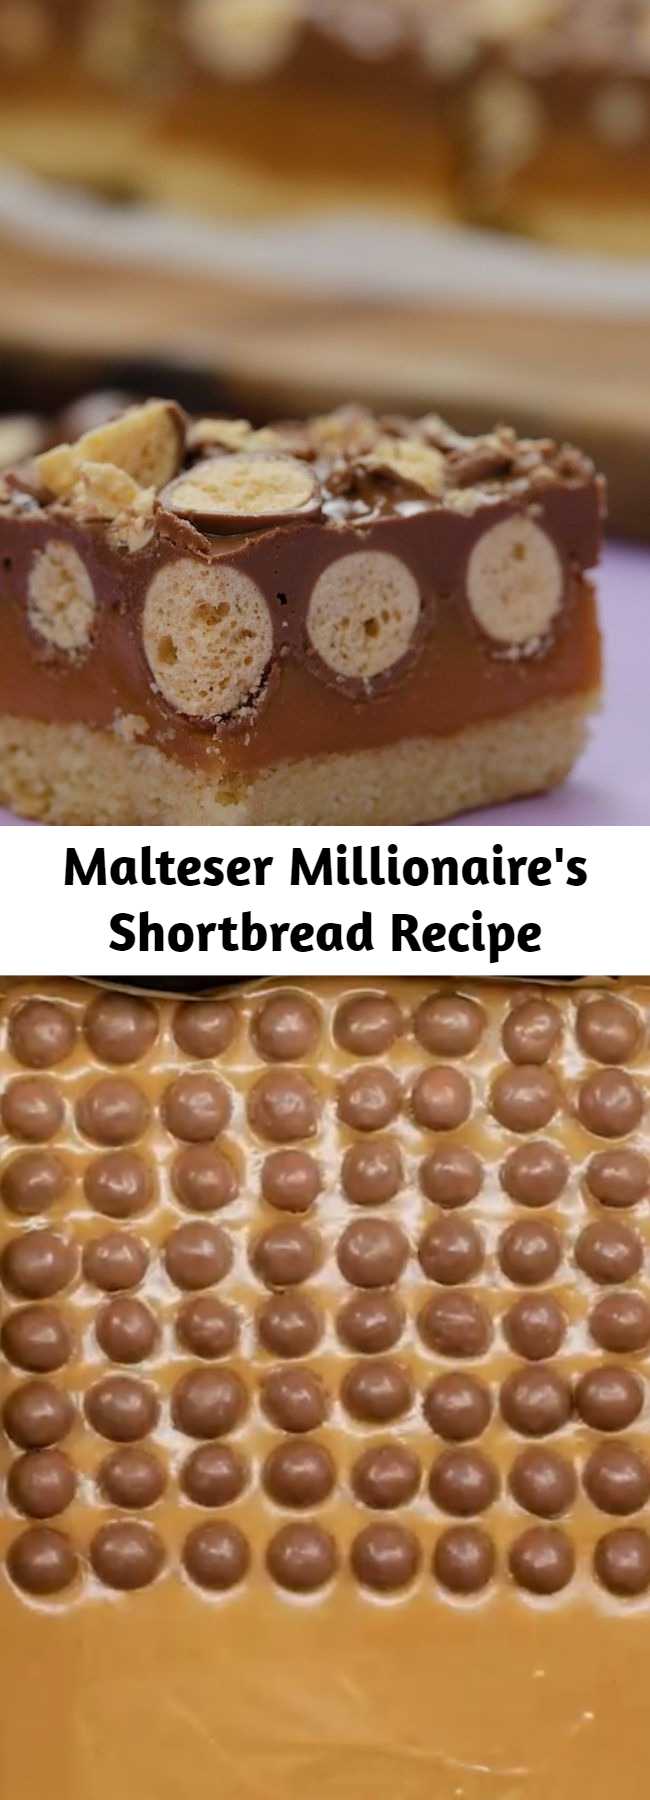 Malteser Millionaire's Shortbread Recipe - To all the Malteser fan out there, this is a next level Malteser Millionaire Shortbread!